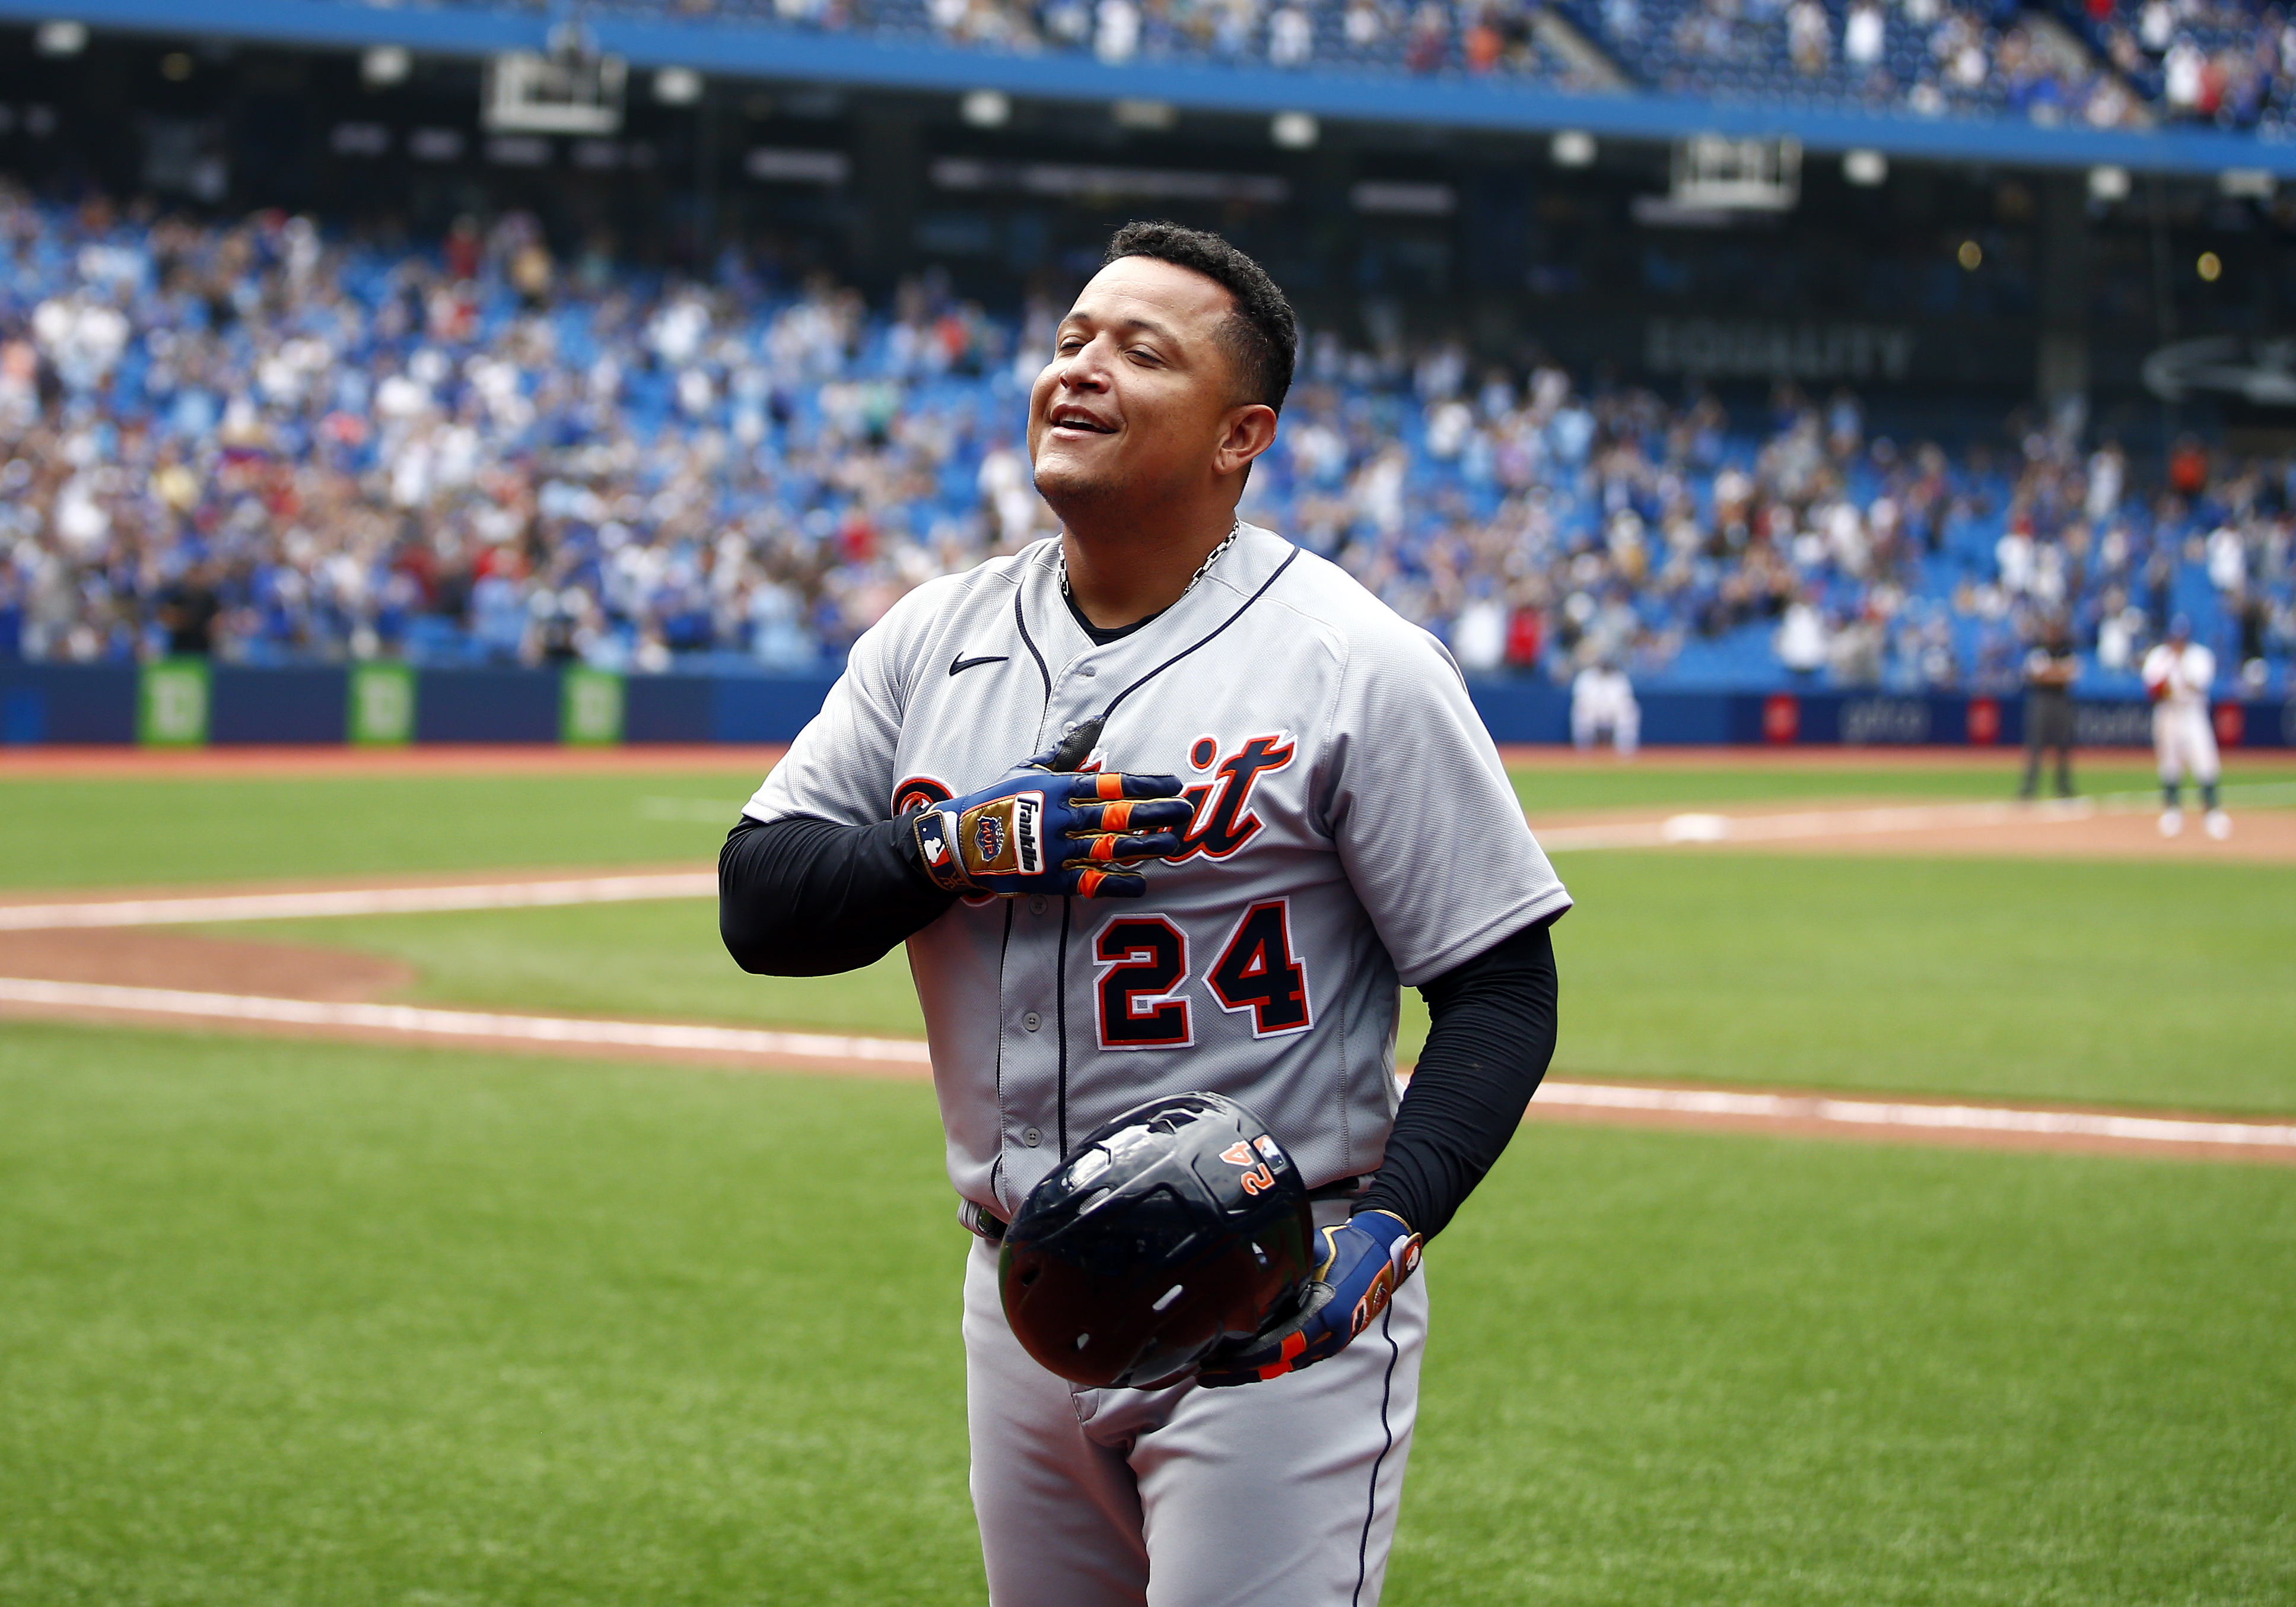 Miguel Cabrera #24 of the Detroit Tigers celebrates after hitting his 500th career home run in the sixth inning during a MLB game against the Toronto Blue Jays at Rogers Centre on August 22, 2021 in Toronto, Ontario, Canada.